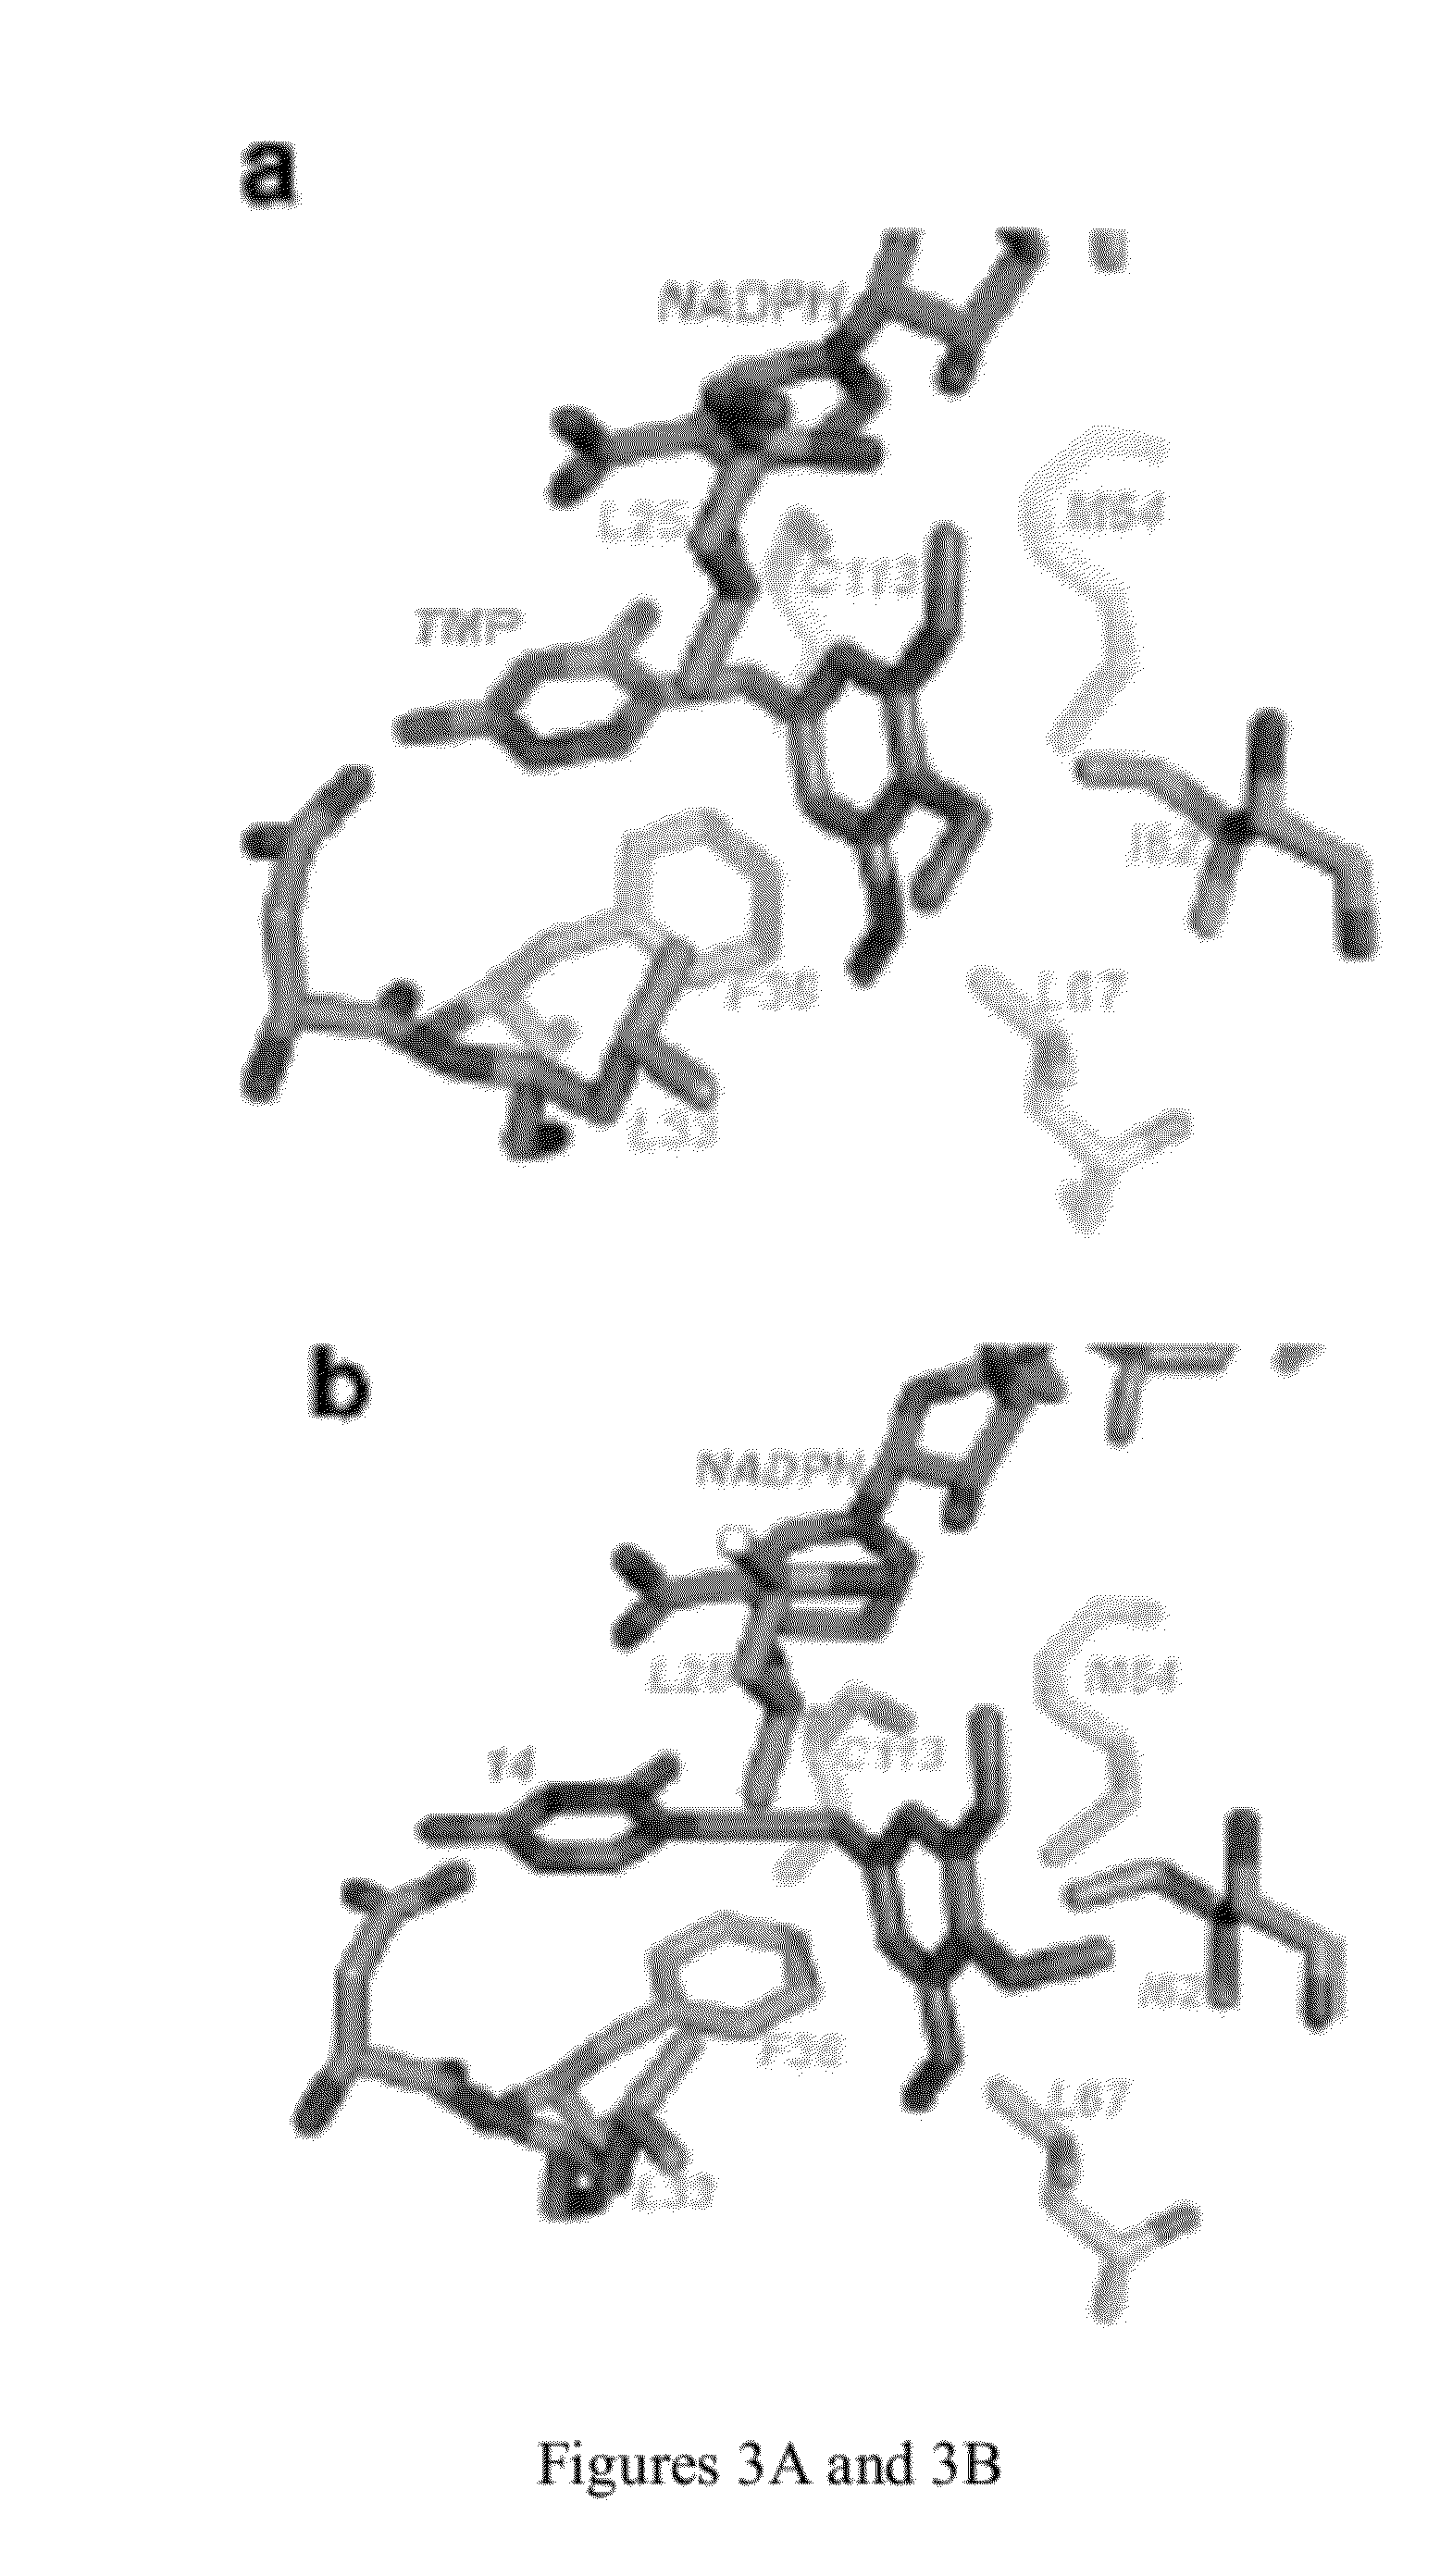 Heterocyclic analogs of propargyl-linked inhibitors of dihydrofolate reductase